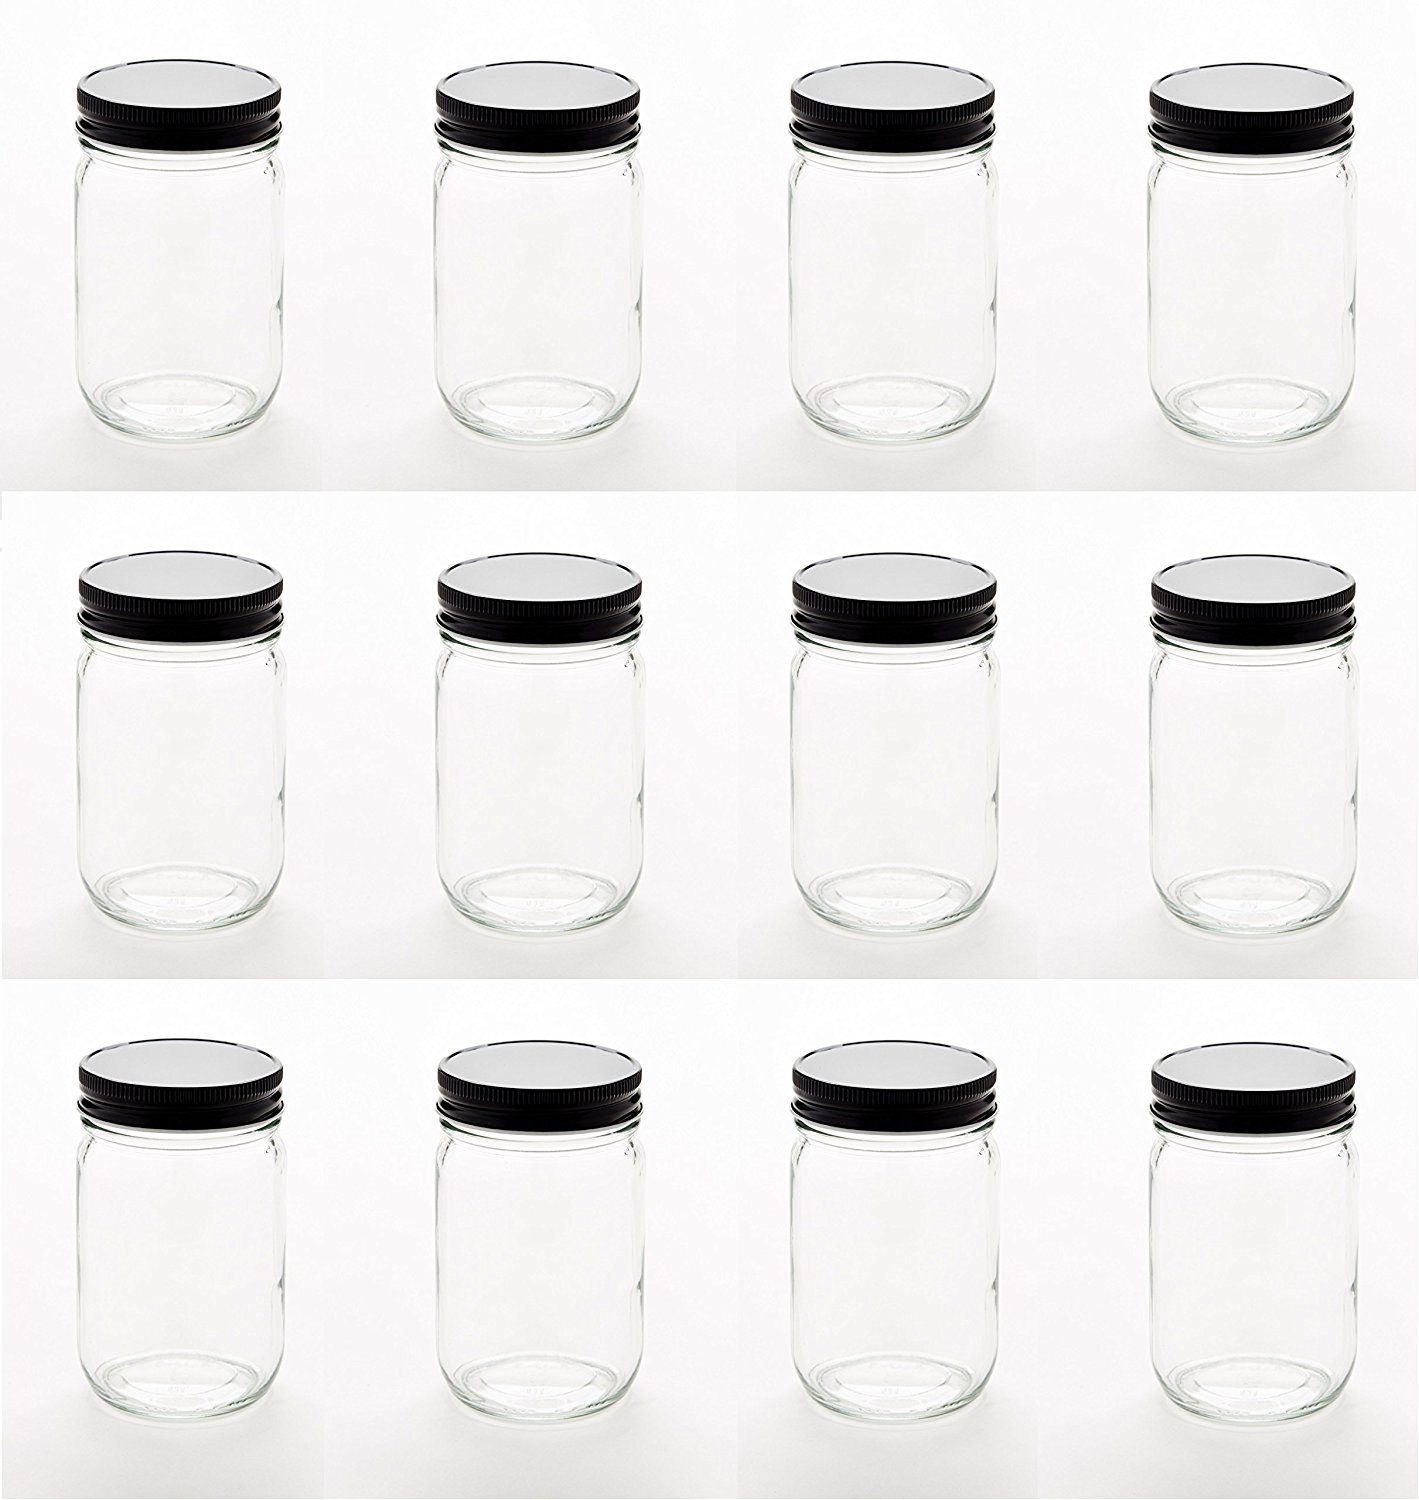 North Mountain Supply 8 Ounce Glass Tall Mason Canning Jars 58mm Mouth - with Black Metal Lids - Case of 12